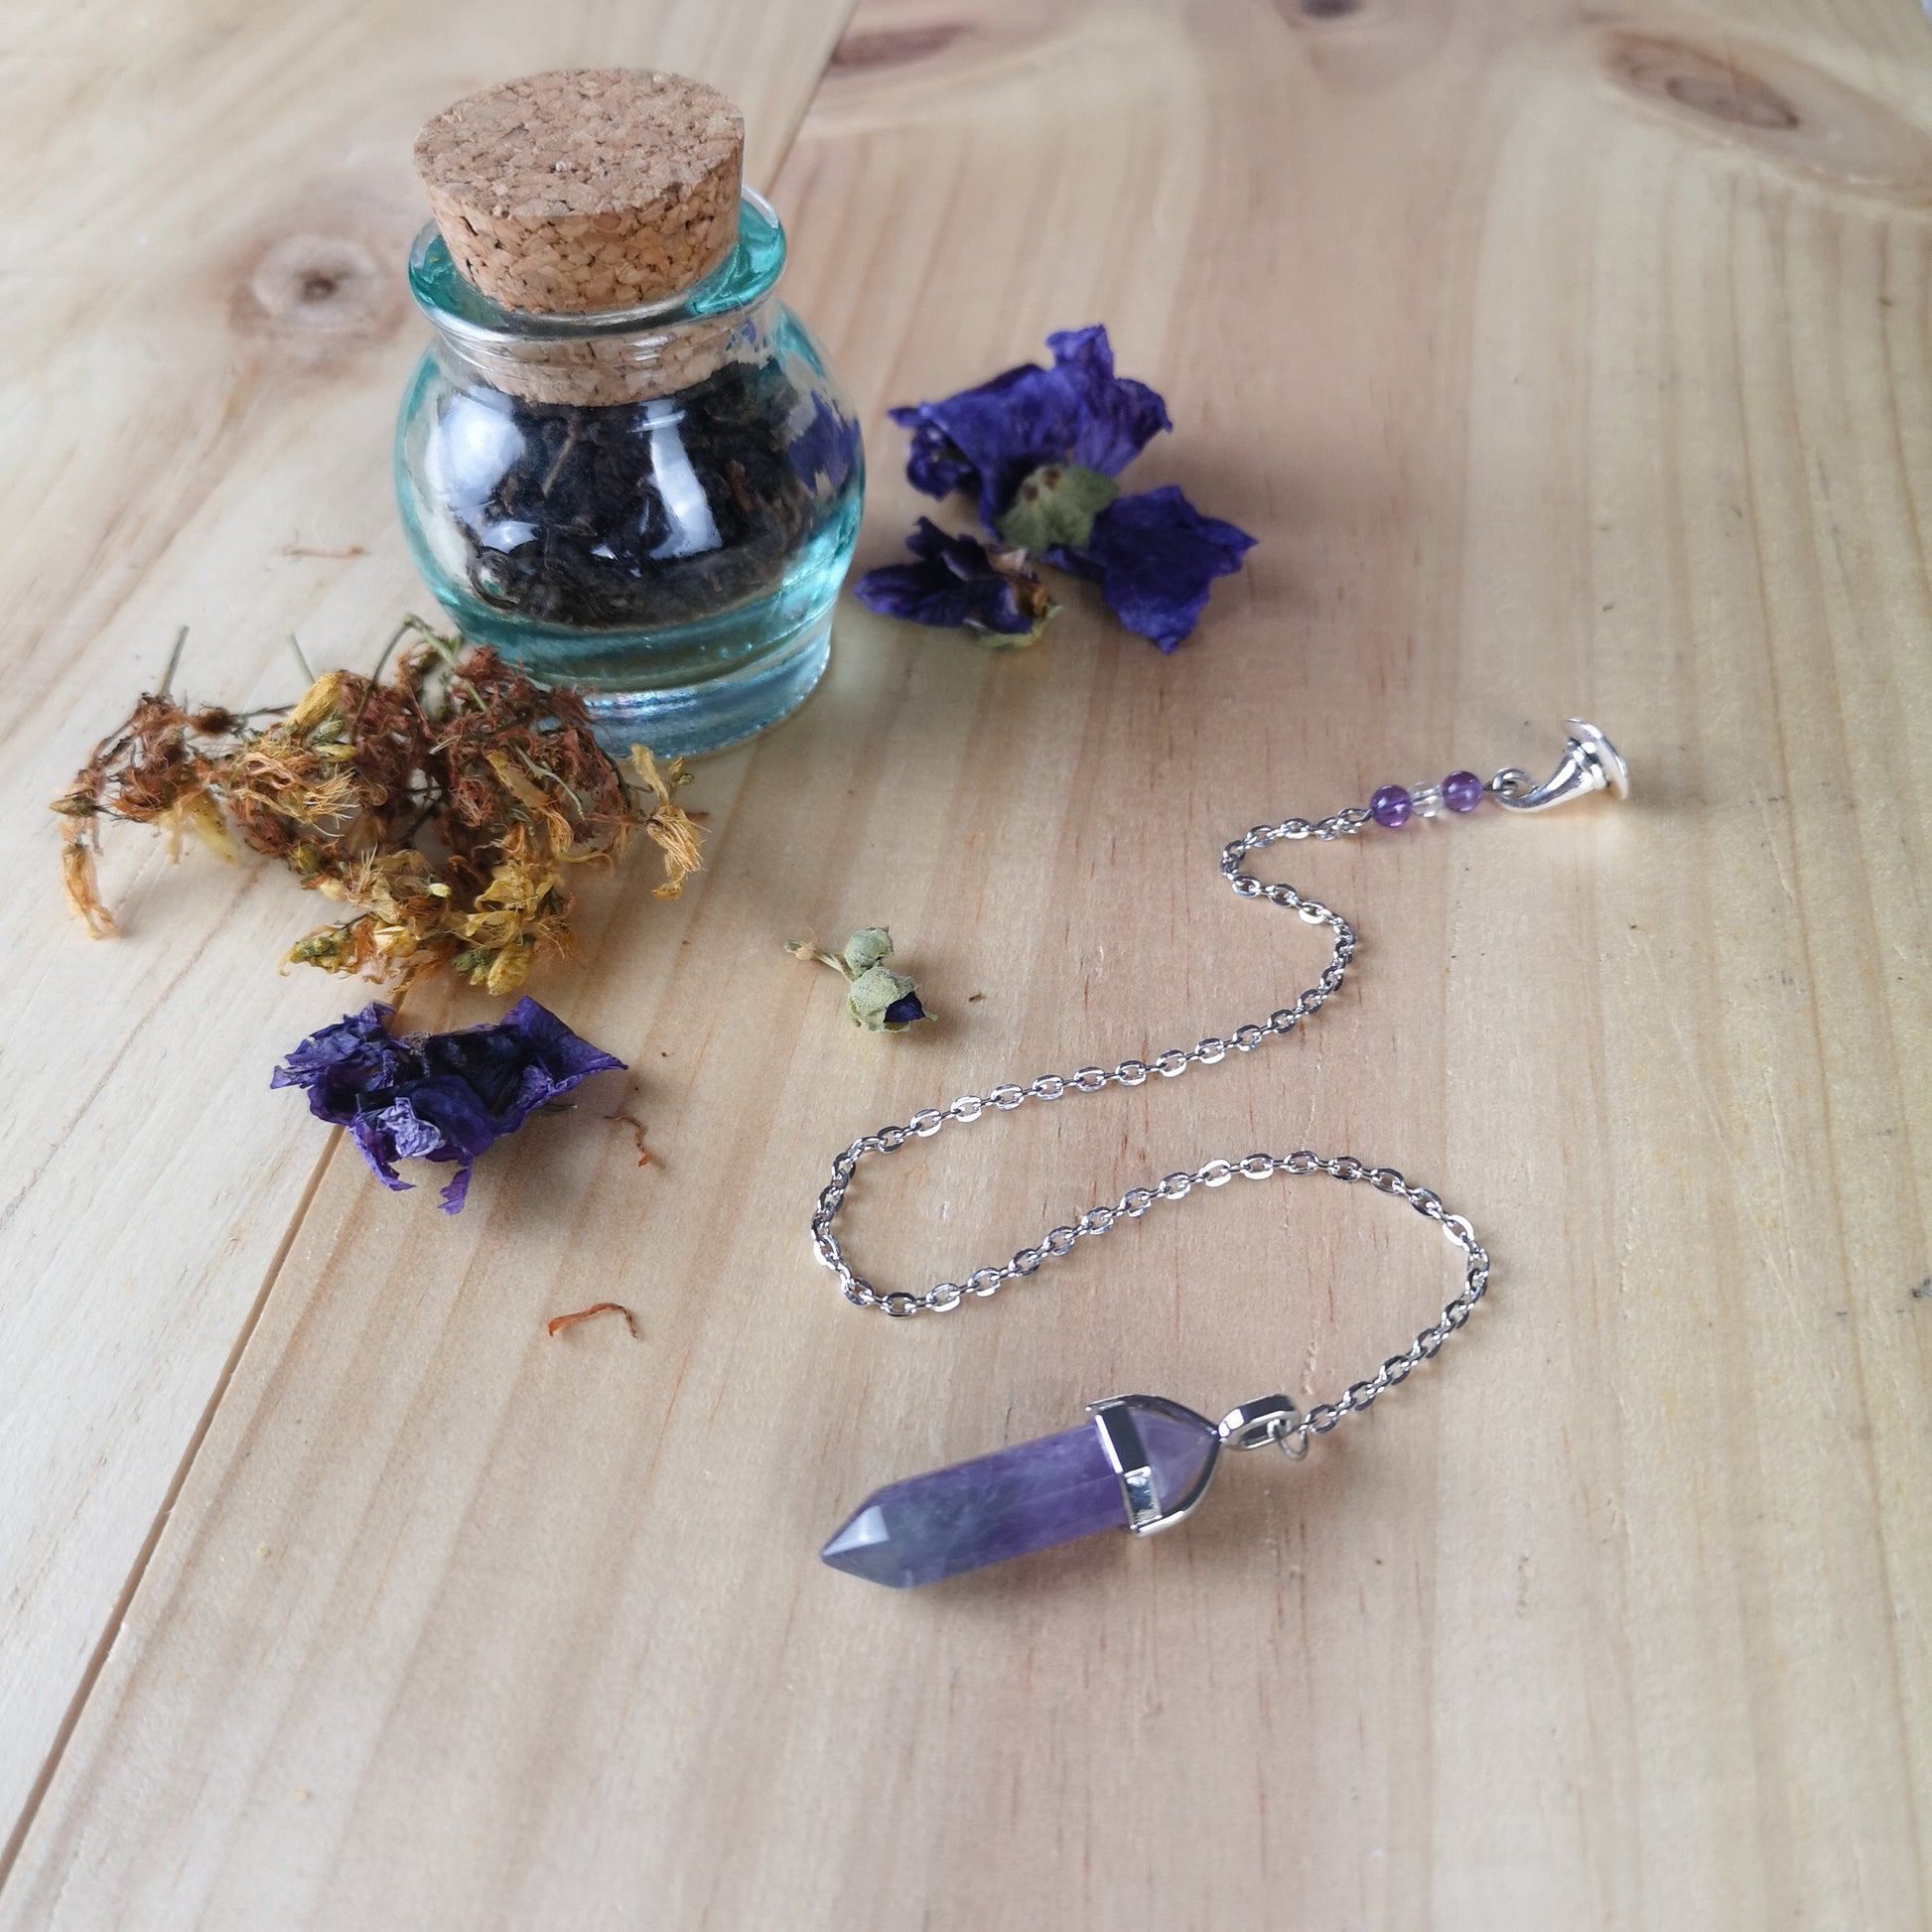 Amethyst gemstone pendulum witch hat charm witchcraft Wiccan divination tool